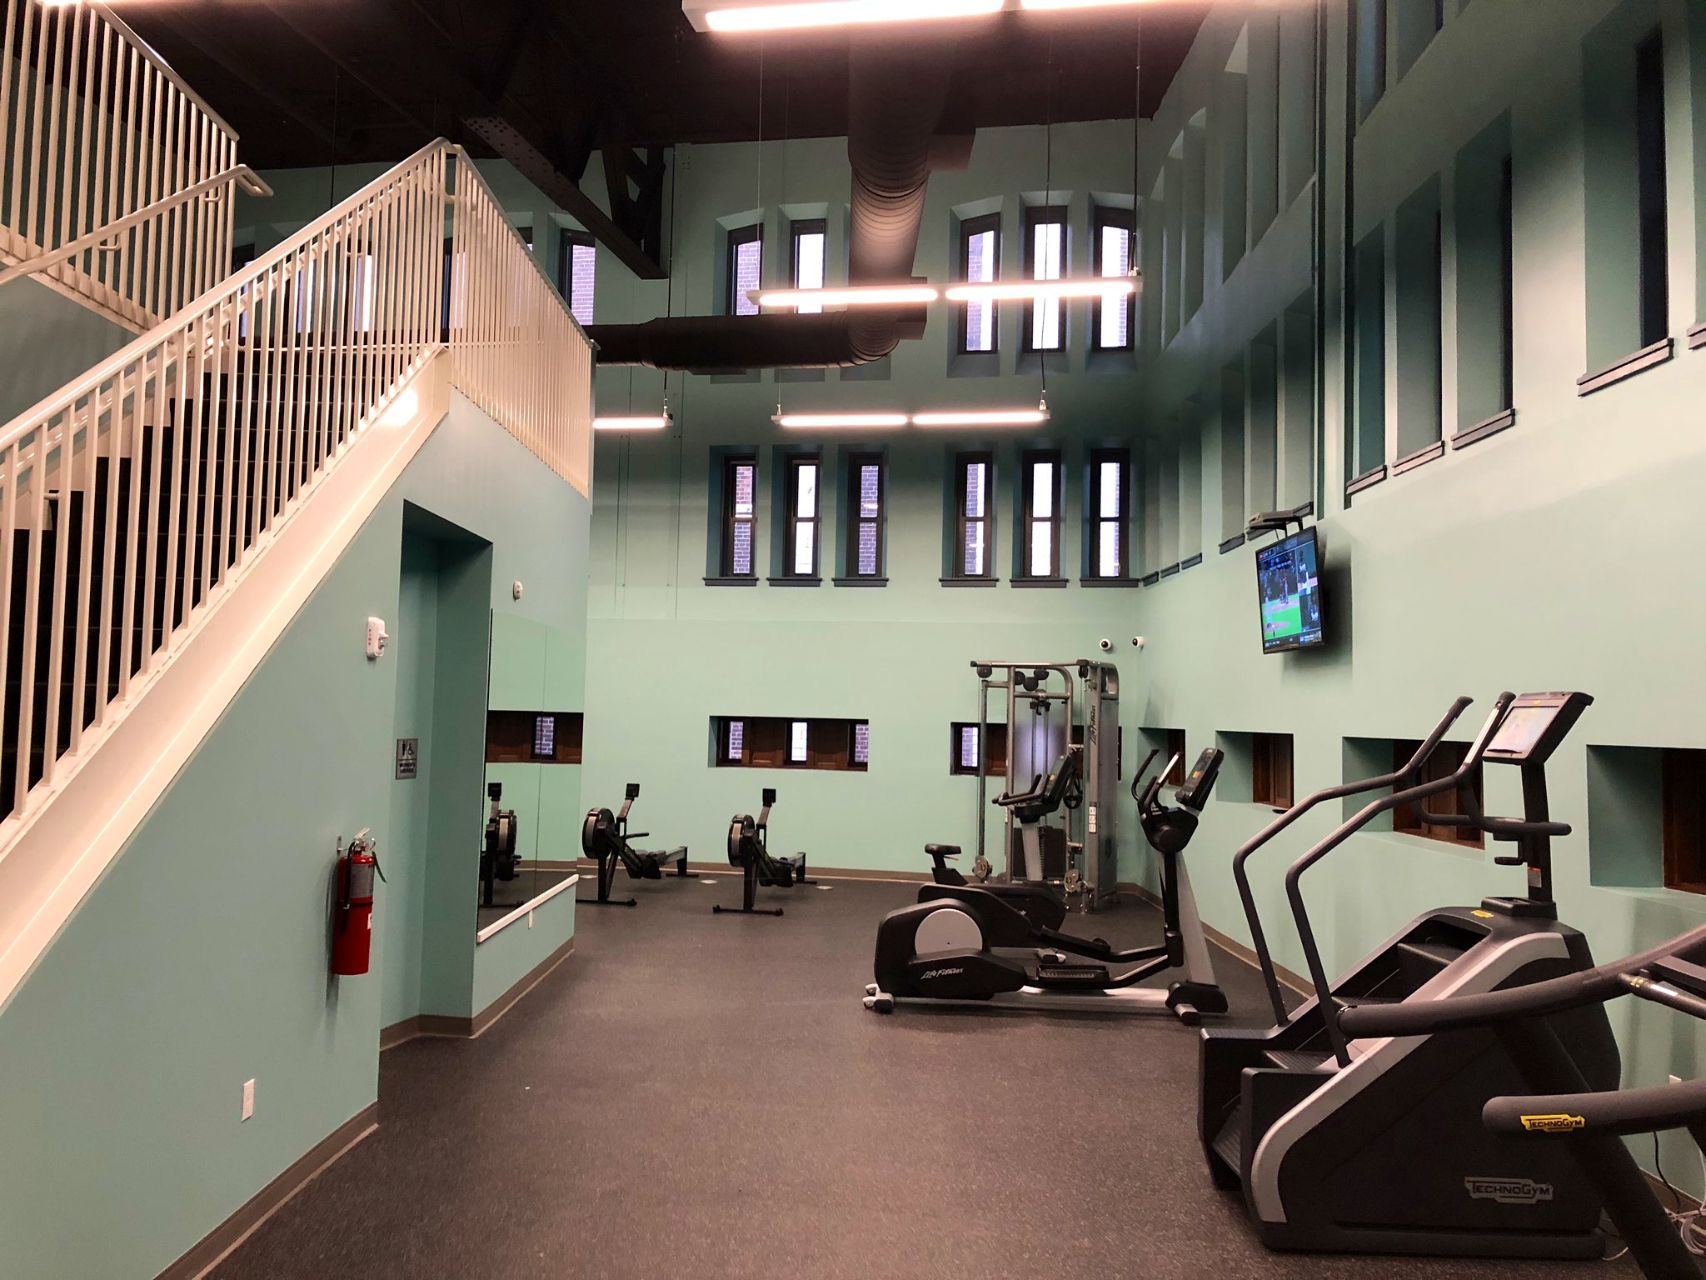 Athlon workout room and fitness space